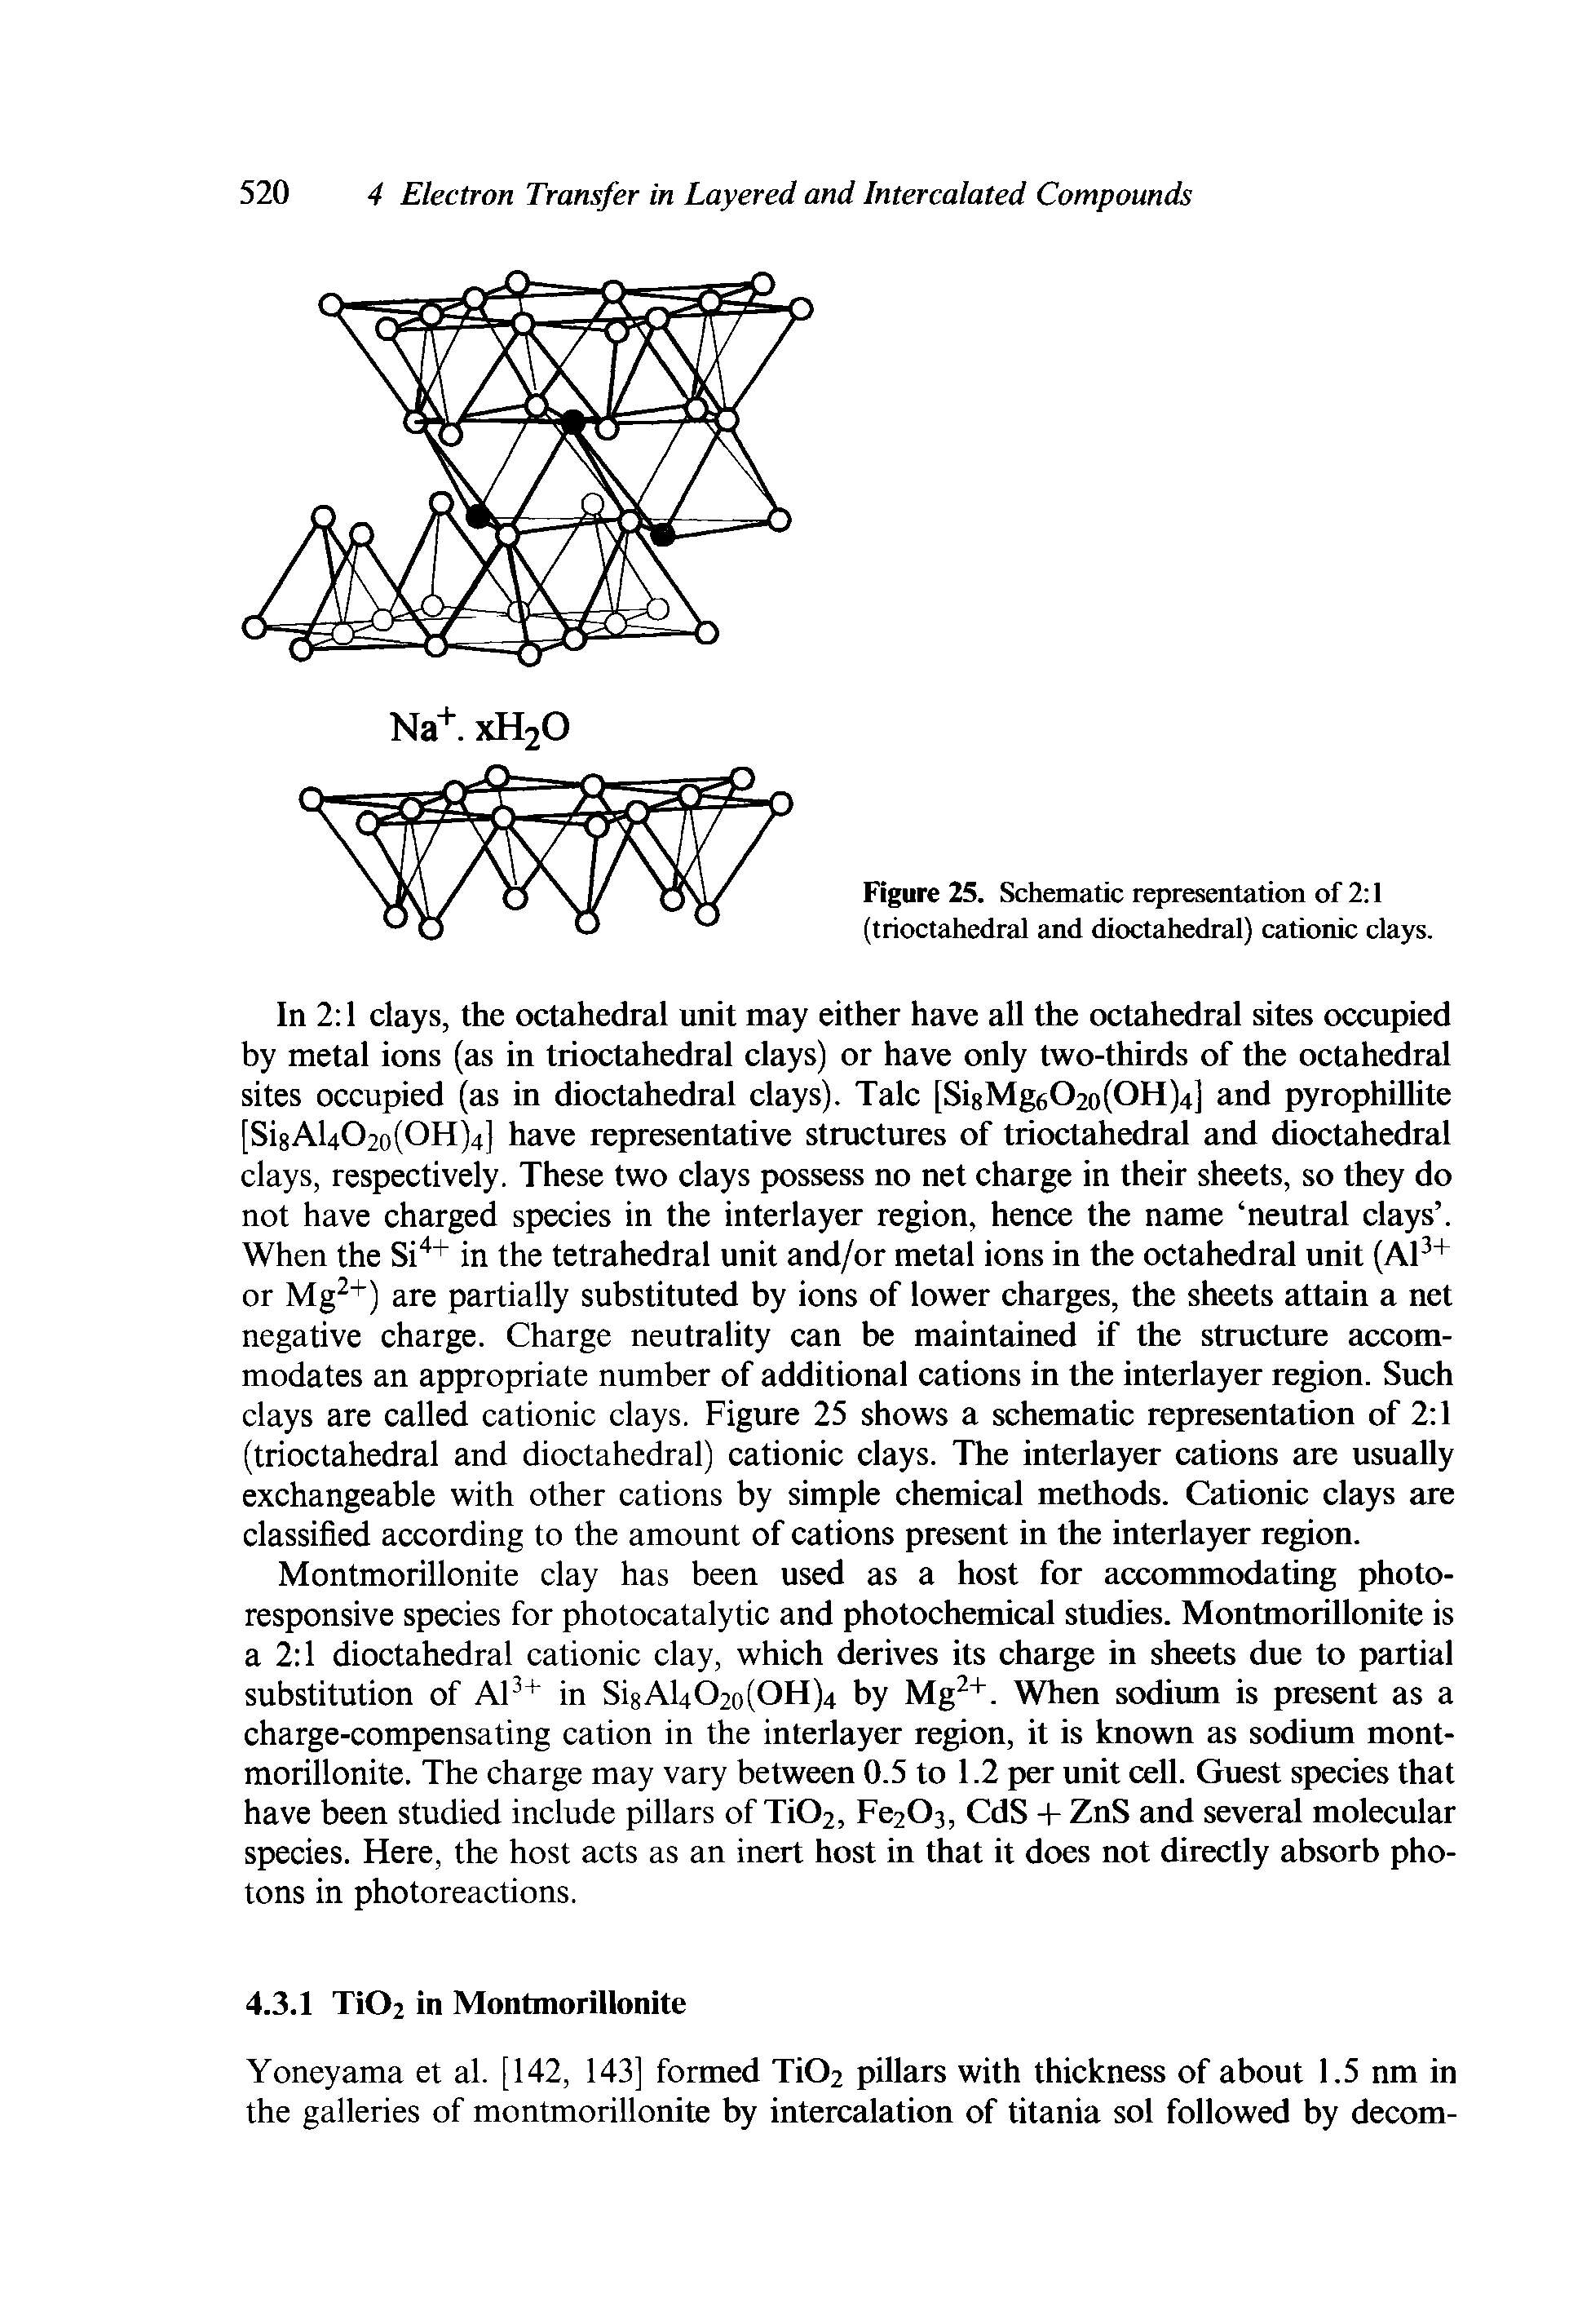 Figure 25. Schematic representation of 2 1 (trioctahedral and dioctahedral) cationic clays.